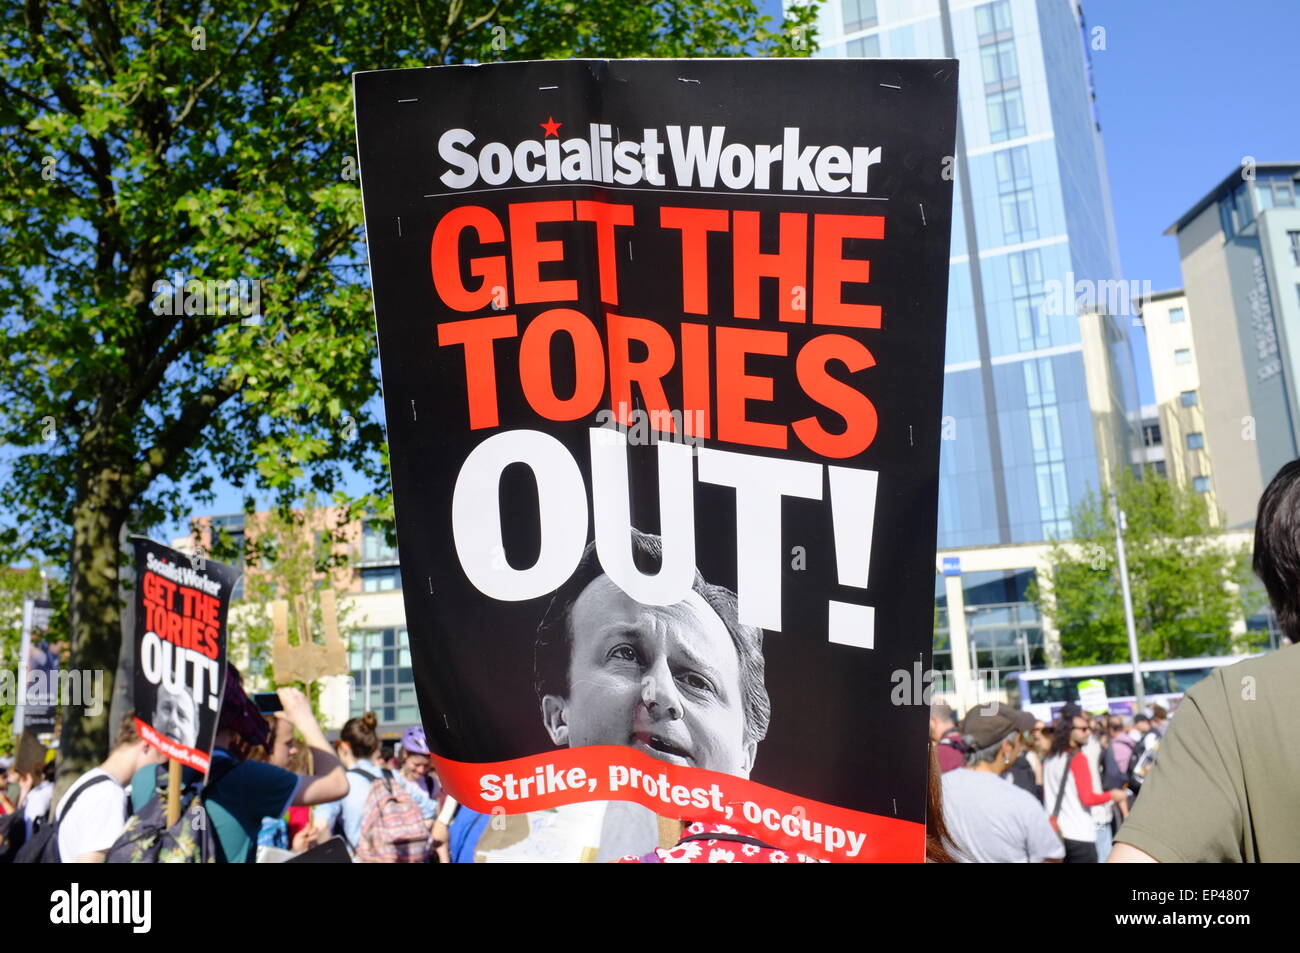 Bristol, UK. 13 May 2015. Thousands march against austerity following the recent election of a Conservative government which has proposed £12bn of welfare cuts. The protest in Bristol is one of many other similar events happening across the country calling for the protection of Welfare spending. Credit:  Jonny White/Alamy Live News Stock Photo